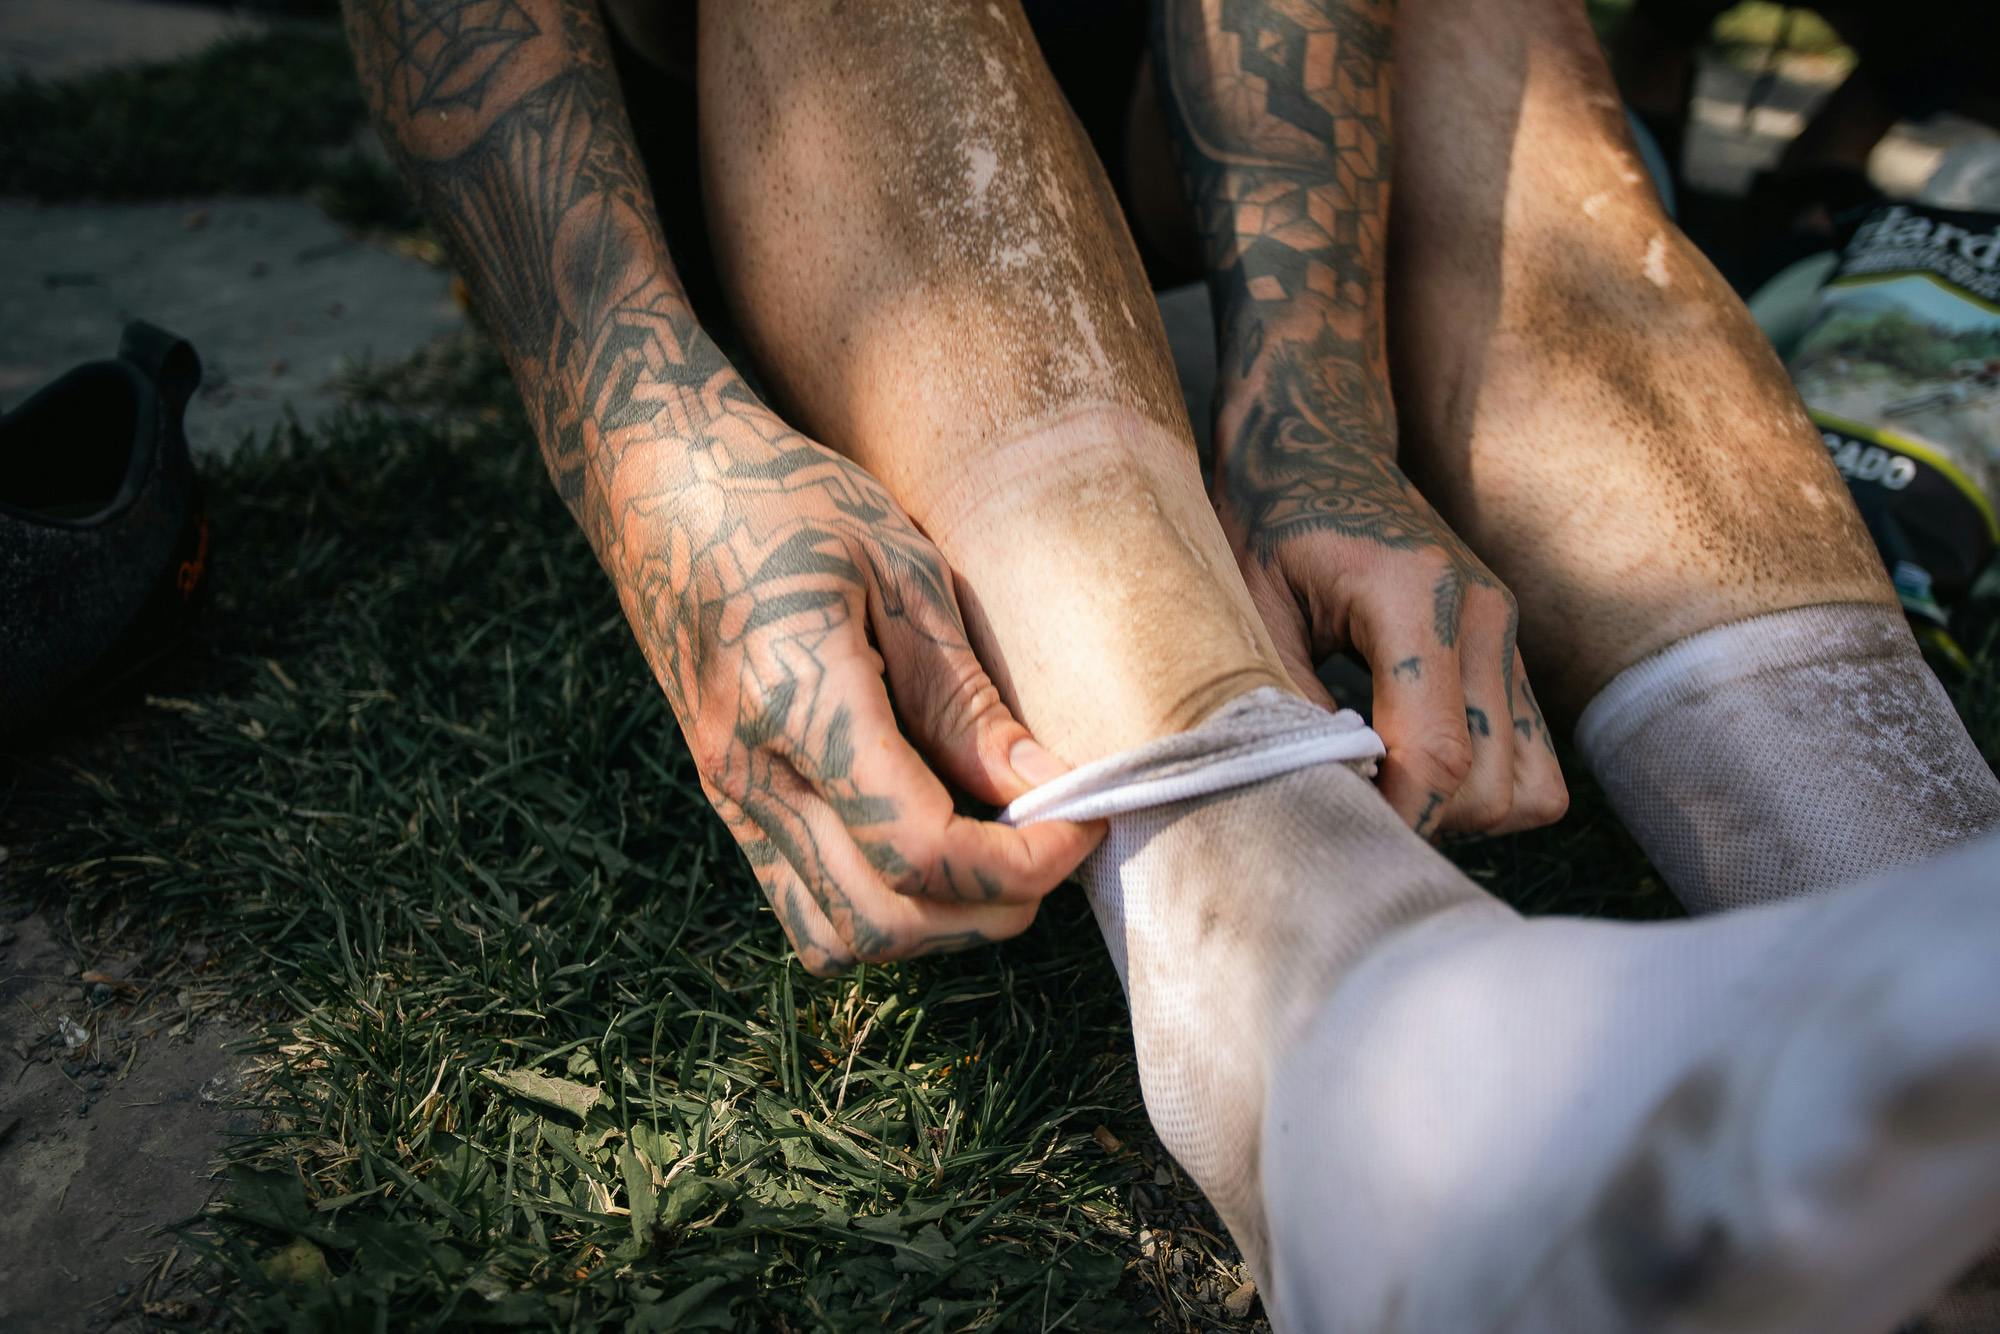 A racer takes his socks off after a hard race.